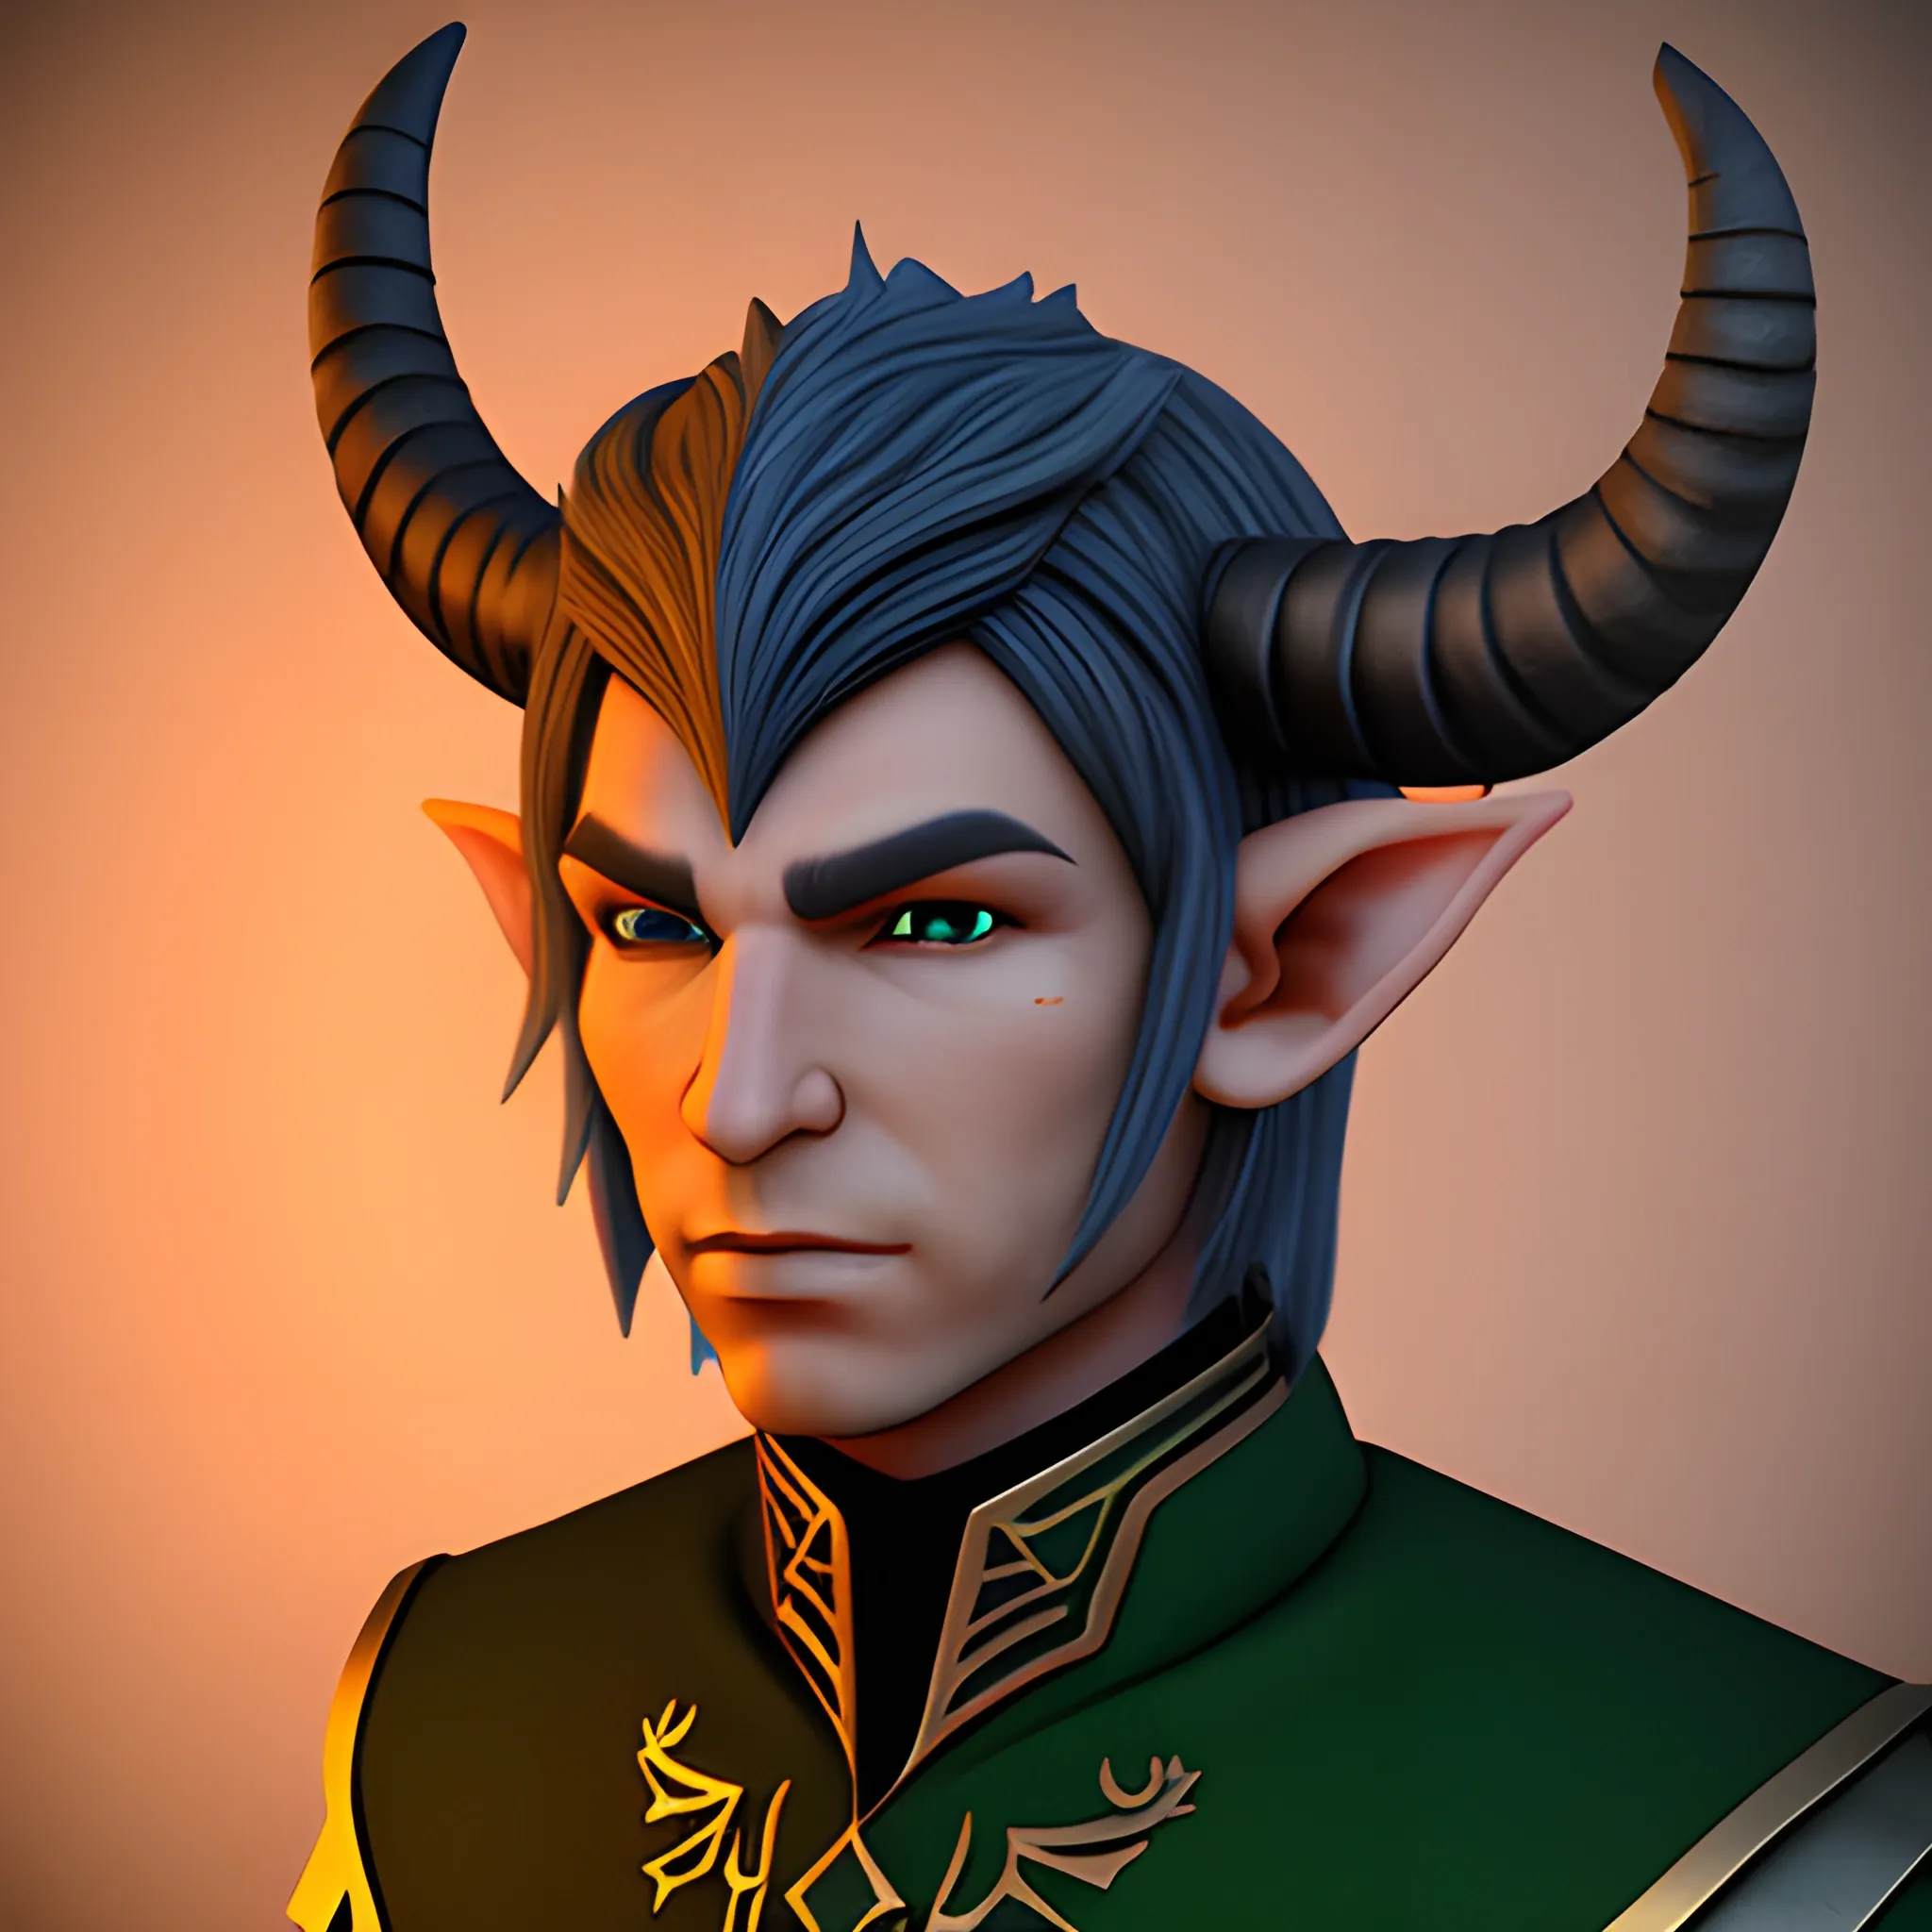 Male Elf with horns, 3D